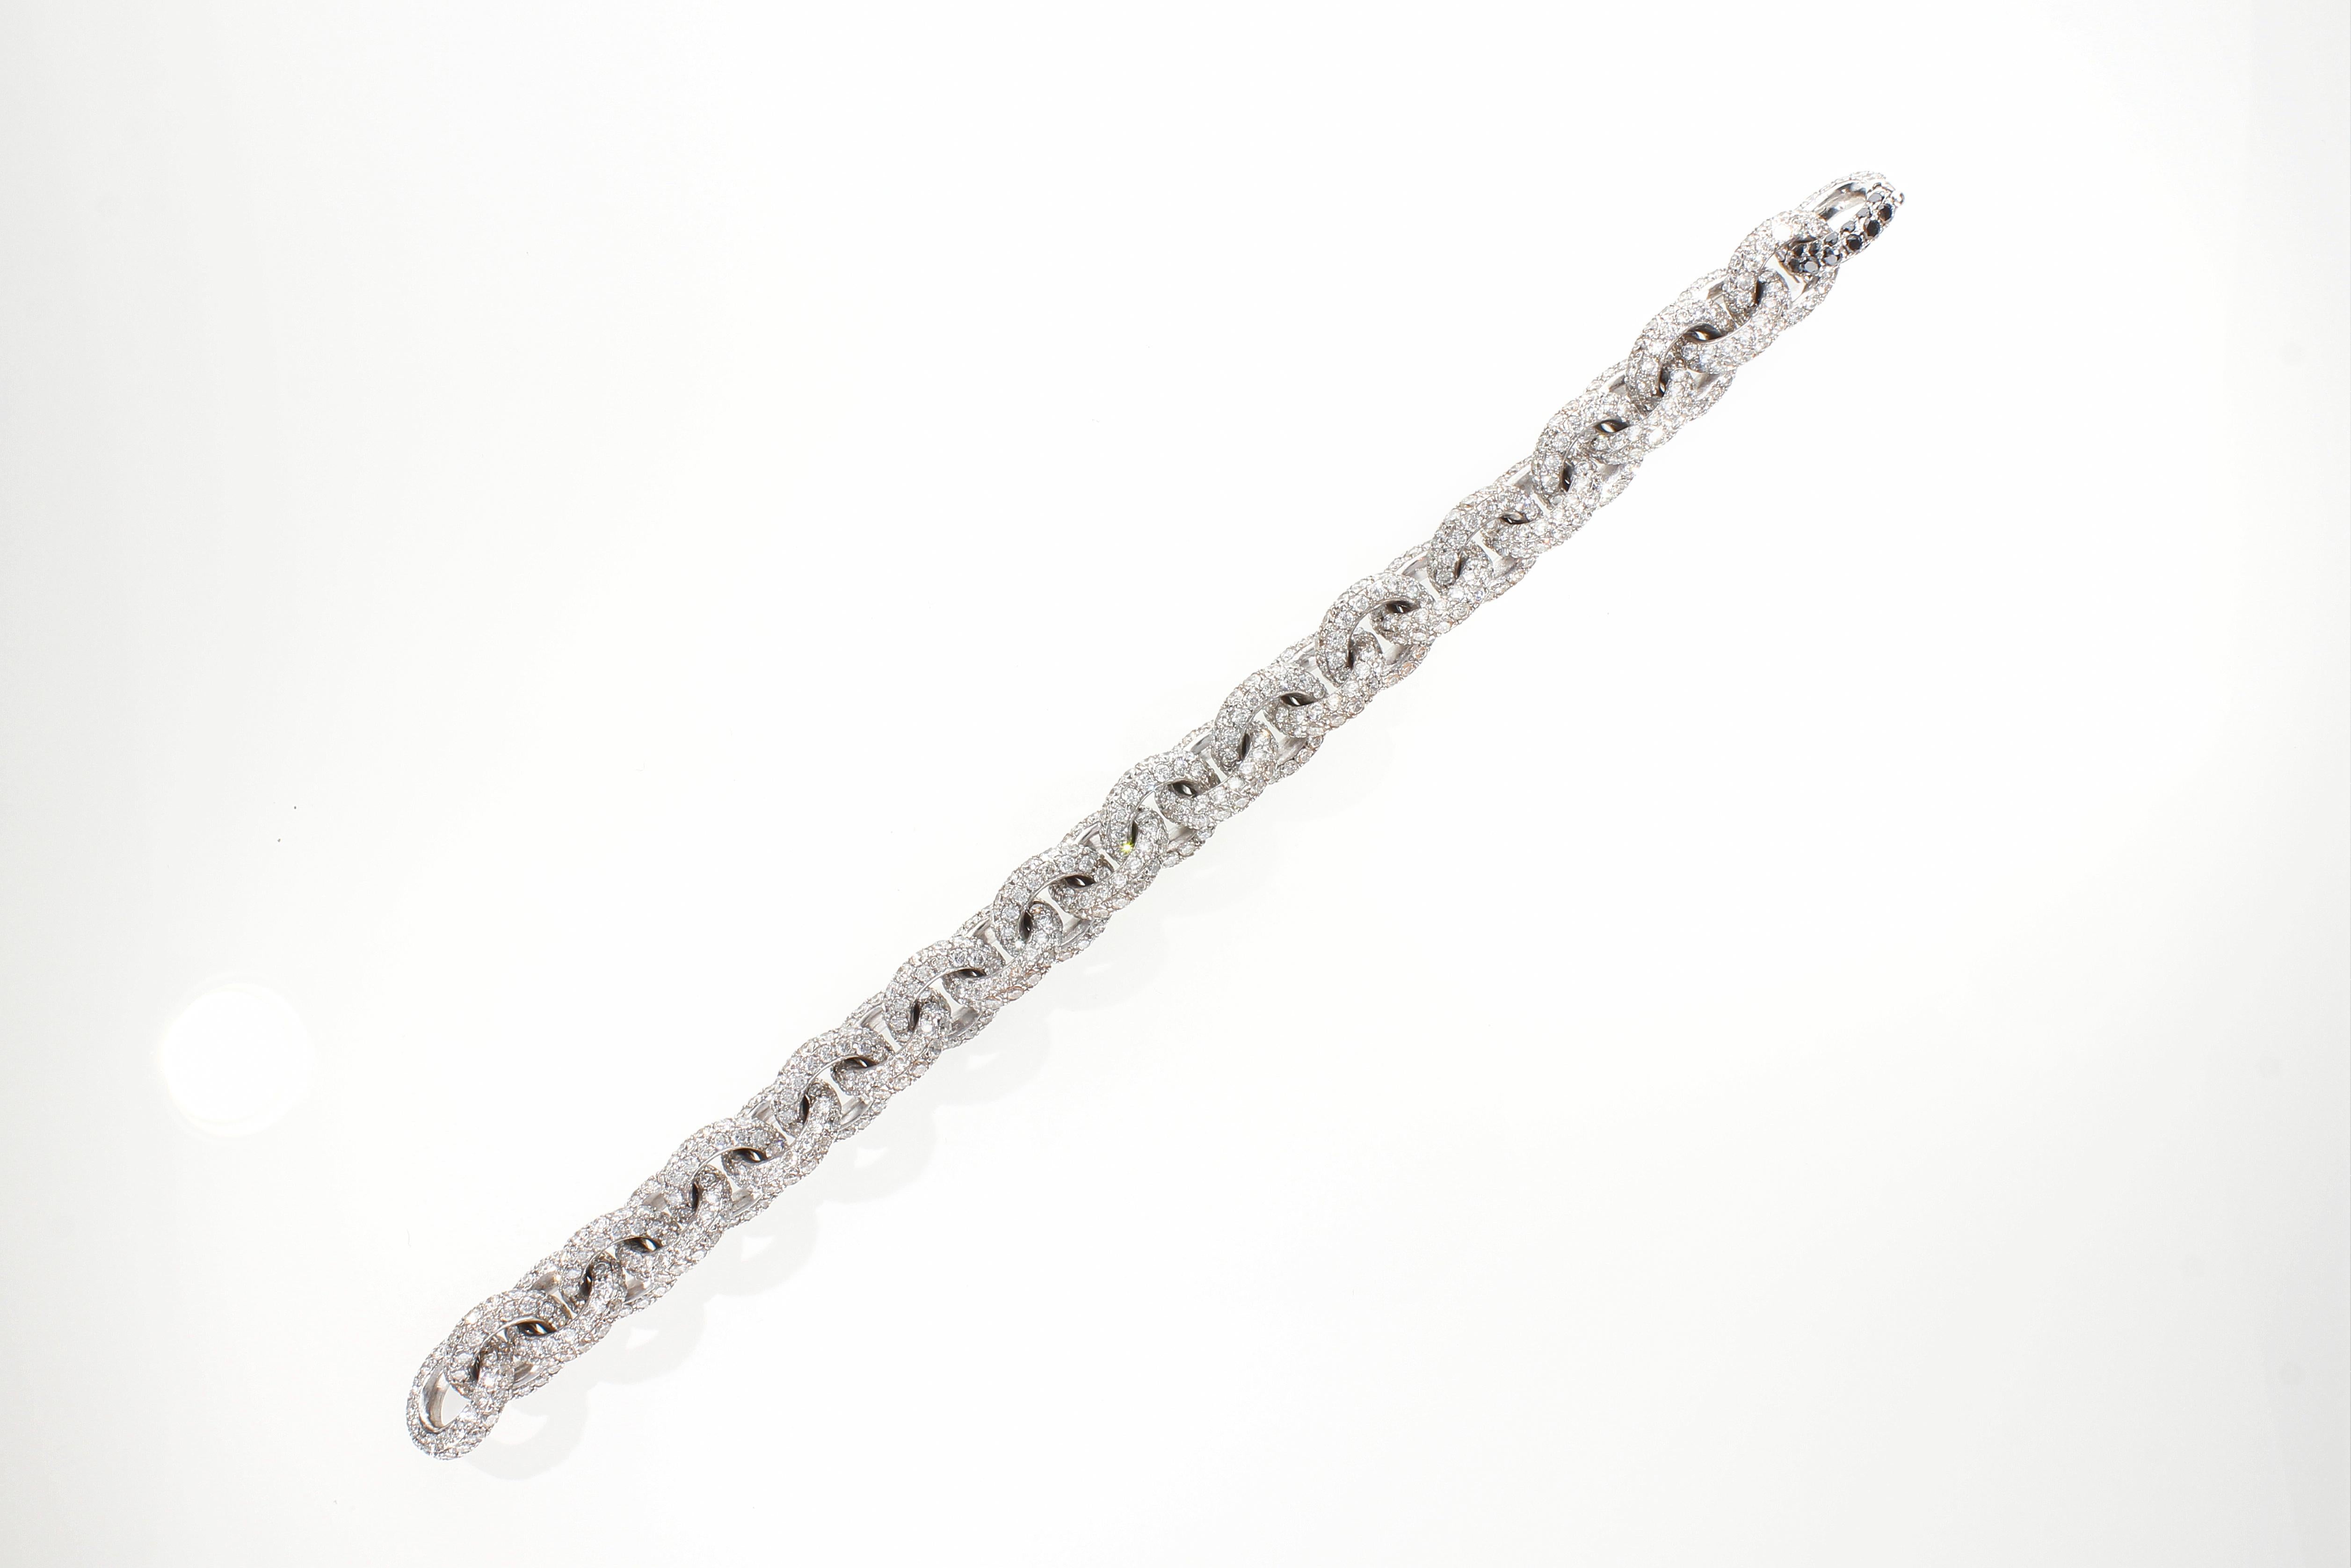 Chain Bracelet with 30.76 Ct of White Diamonds. Handmade. Made in Italy For Sale 3